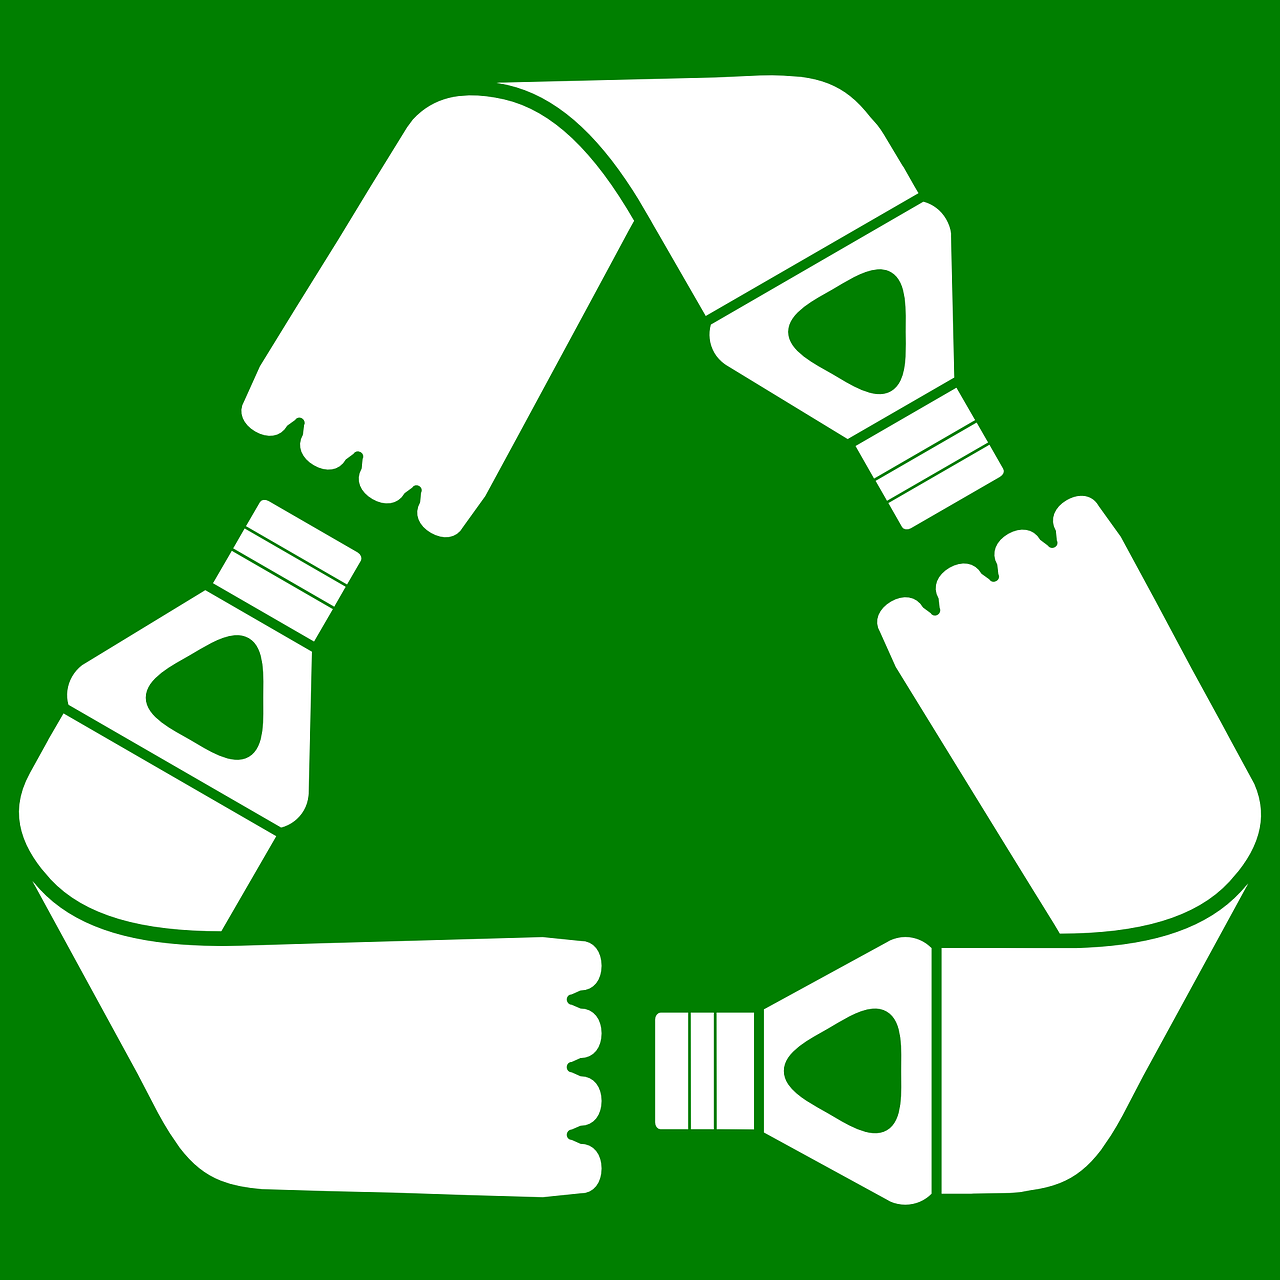 Directives and applicable legislation on recycled plastic in packaging